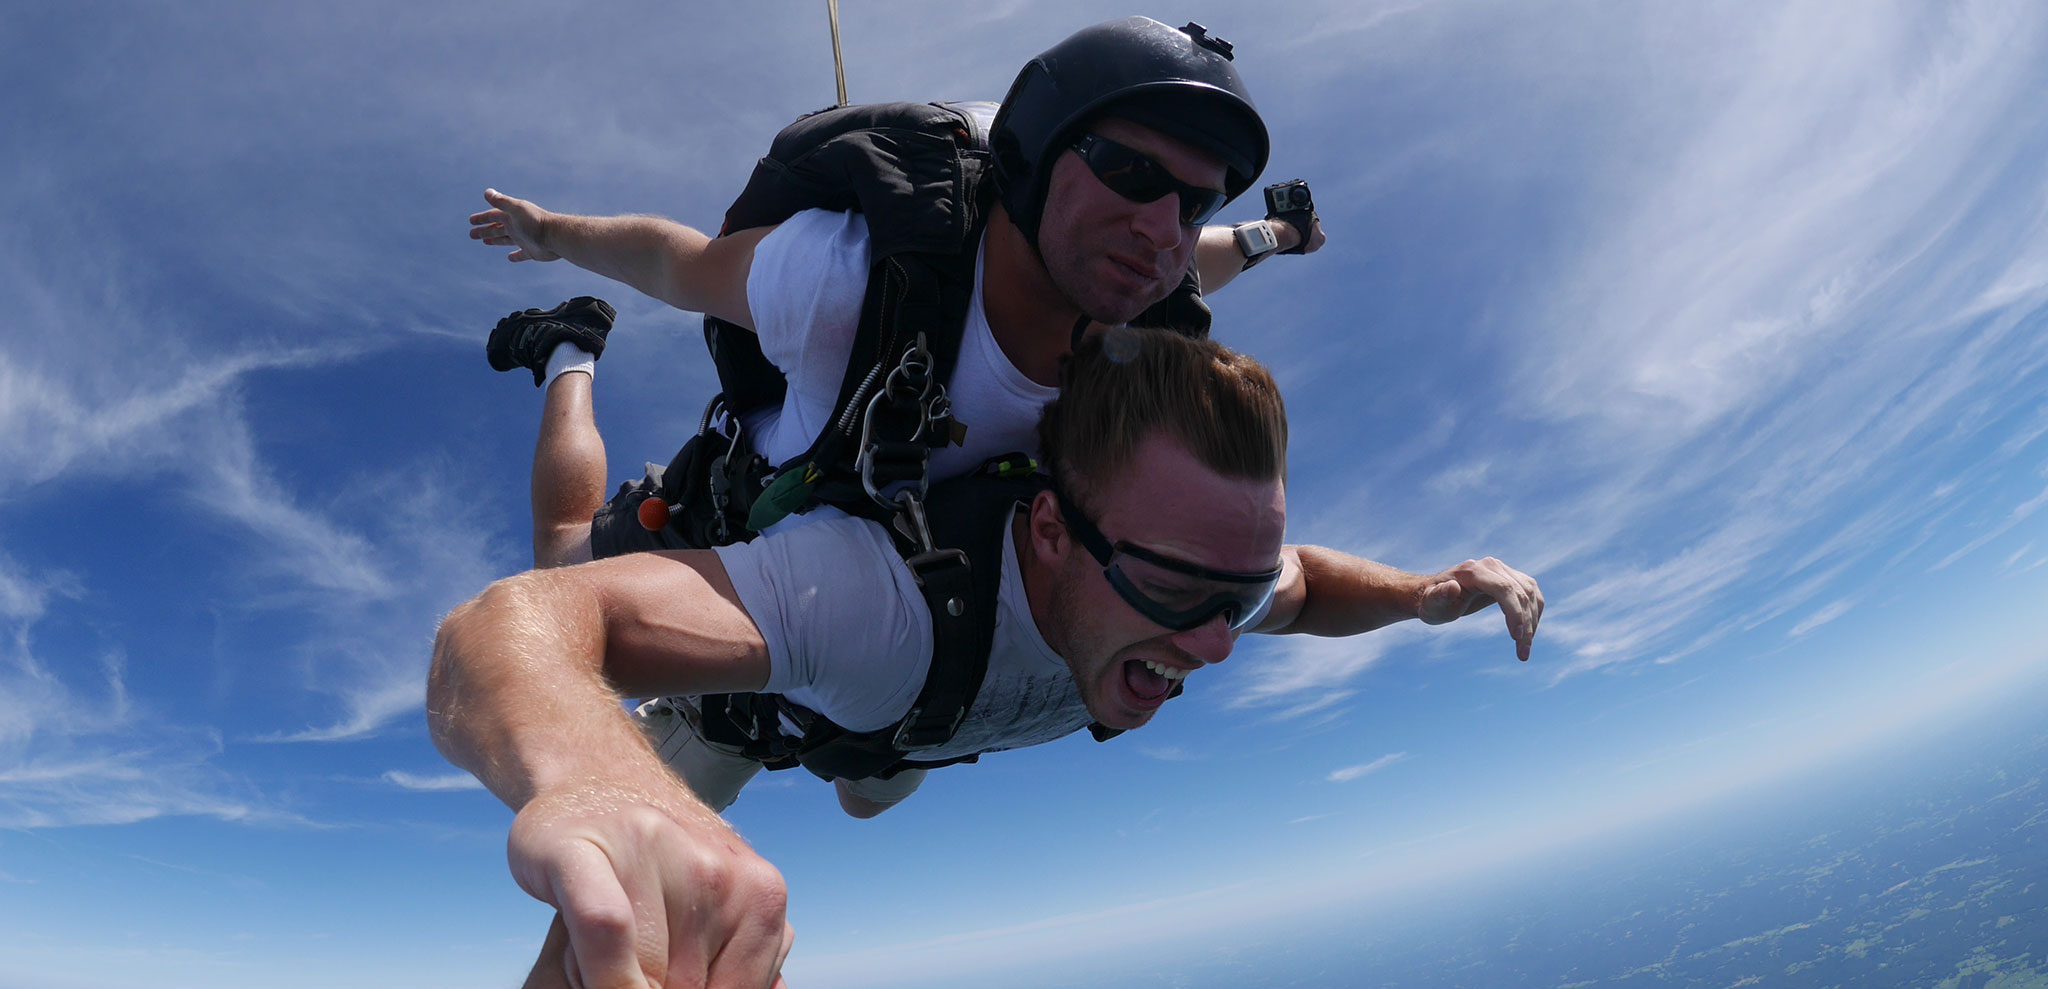 Believe it! Why Music City is the best tandem skydiving in Tennessee